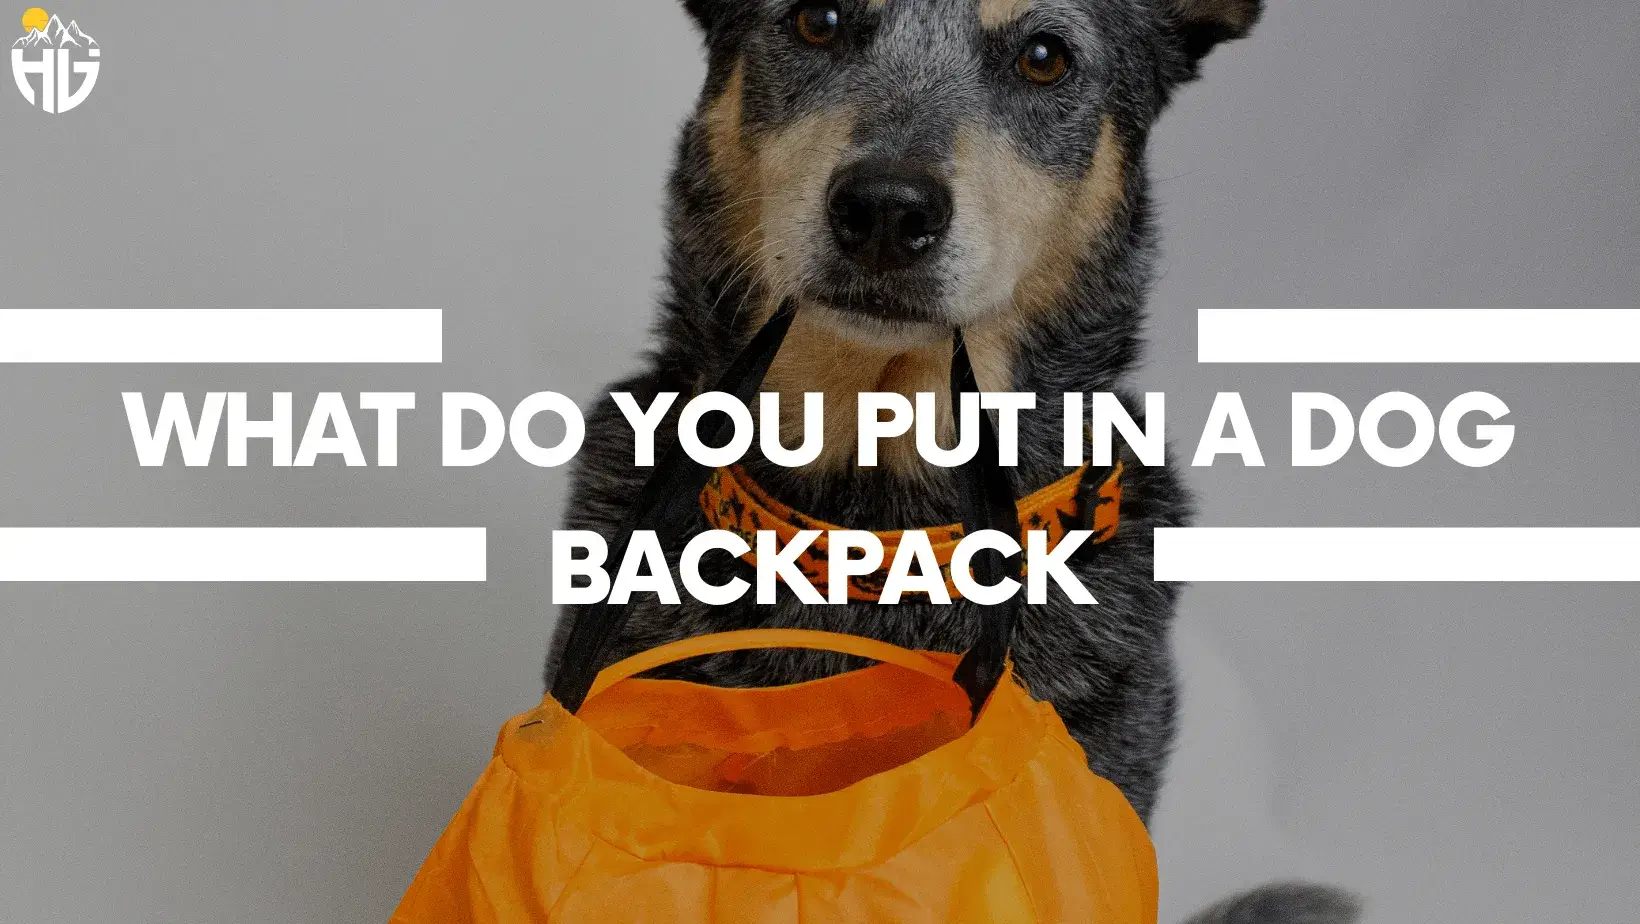 What do you put in a Dog Backpack